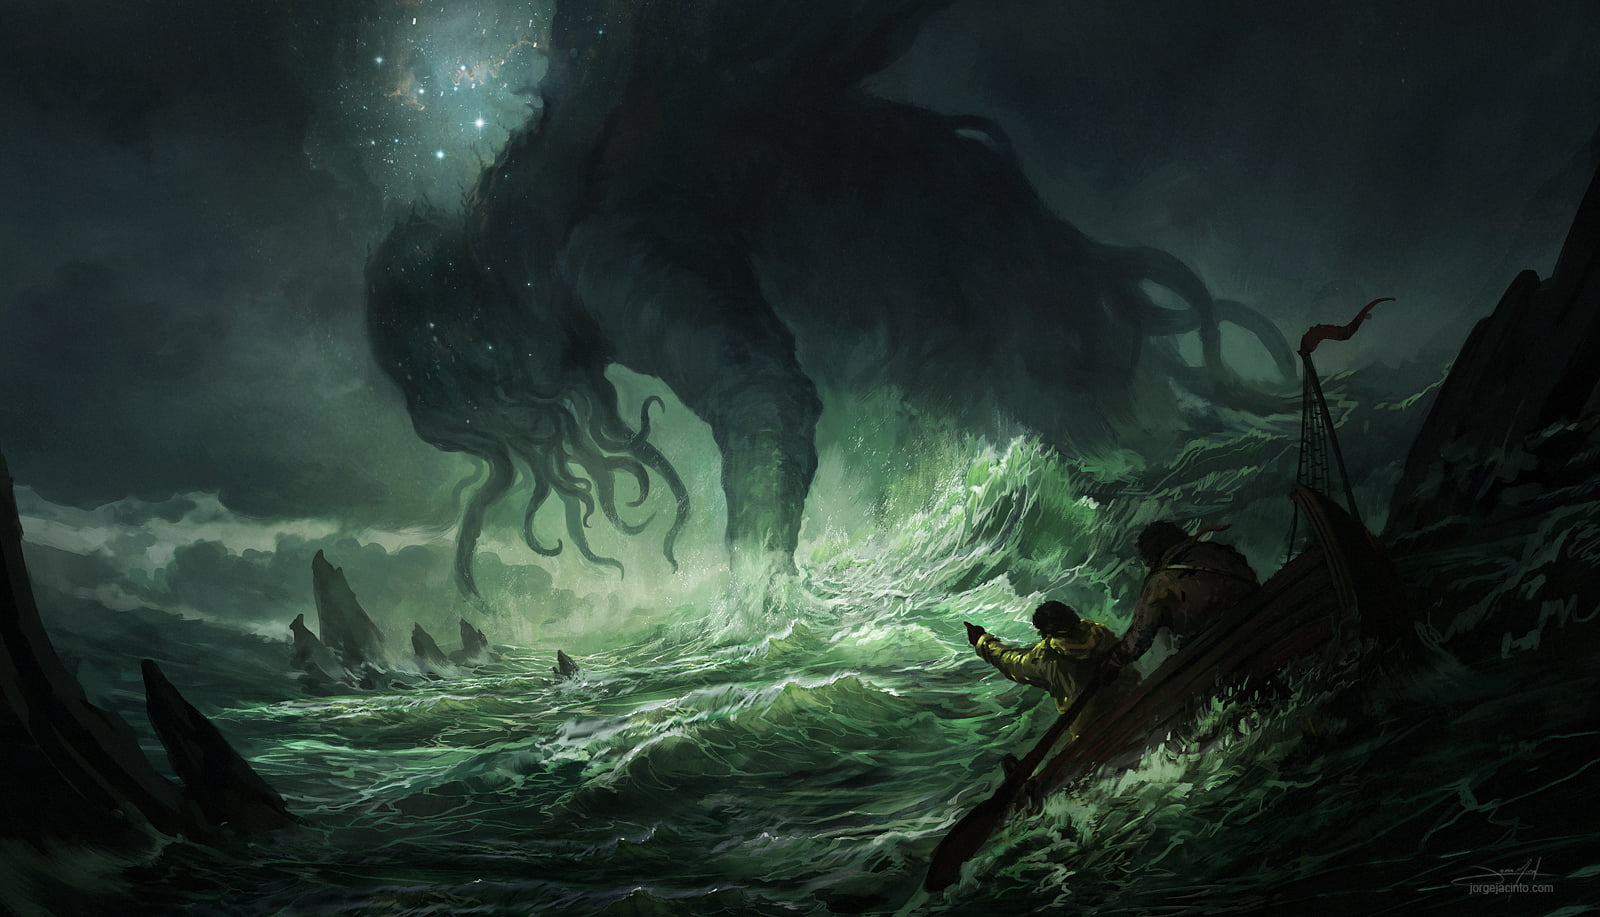 Cthulhu, call of cthulhu, H. P. Lovecraft, science, science fiction